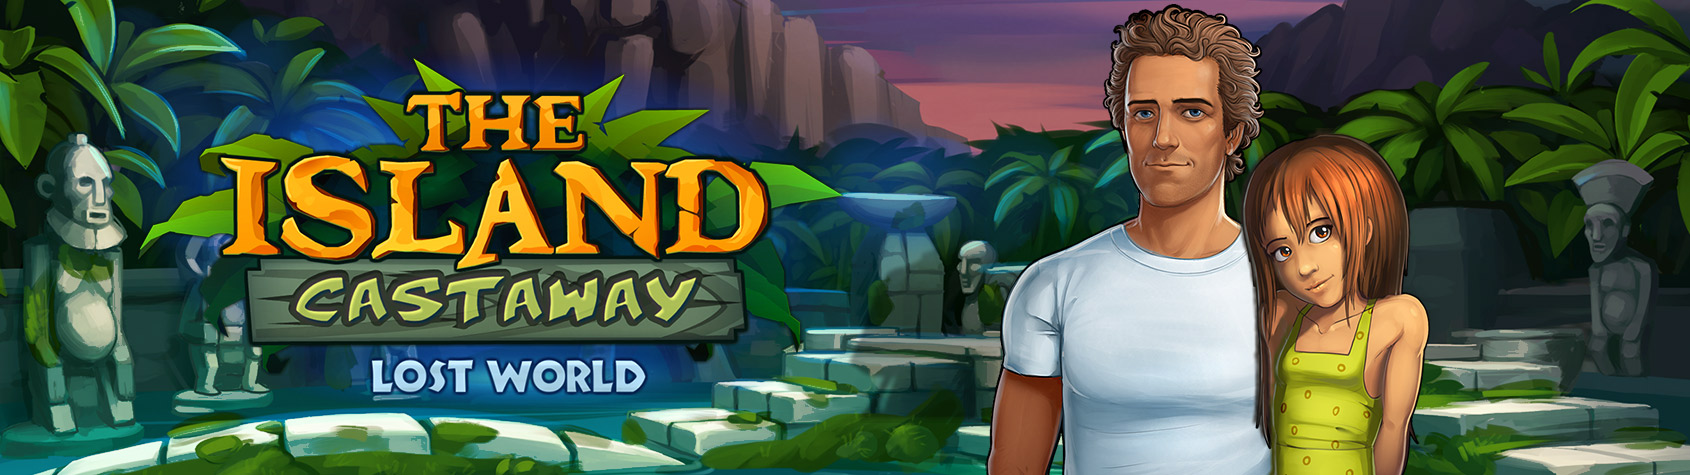 The island castaway 3 pc game download